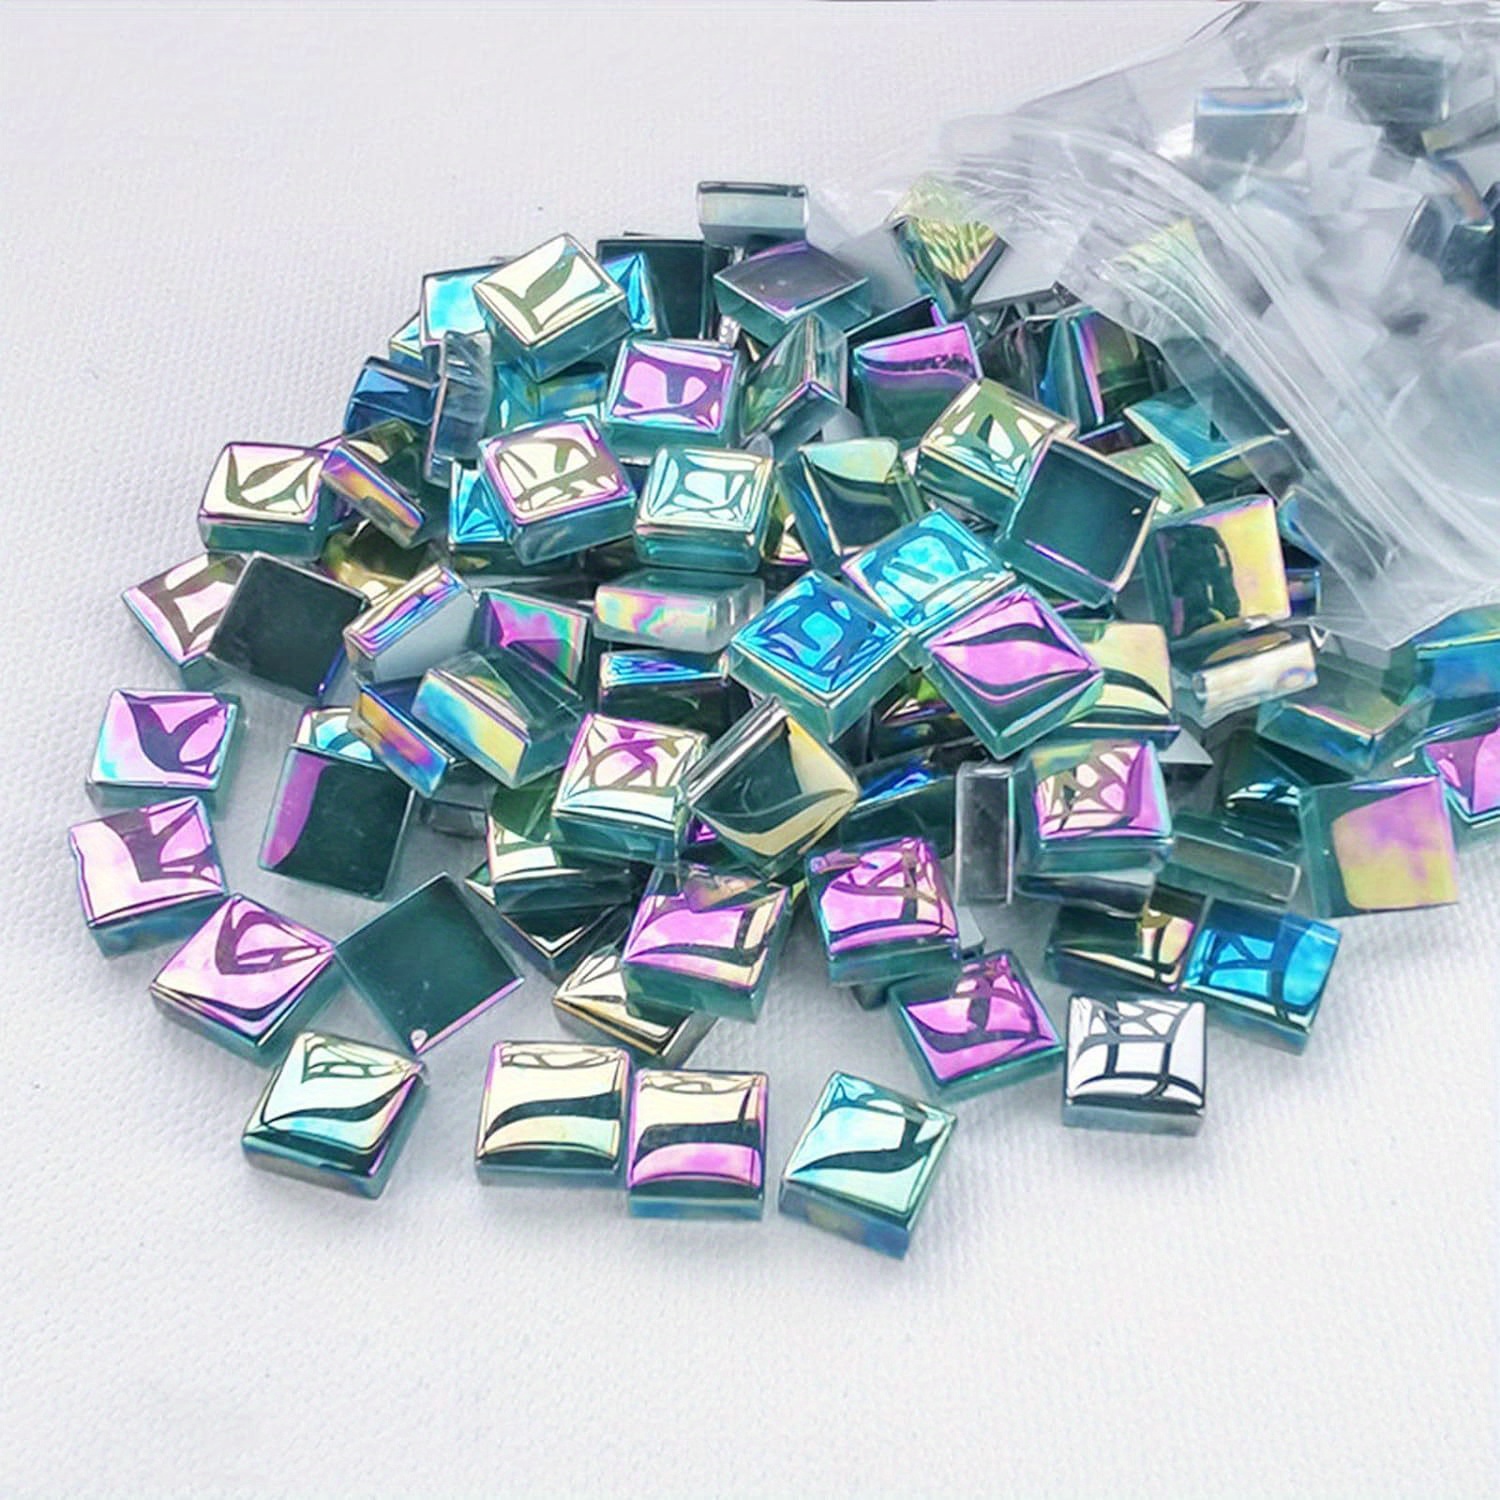 

150-piece Cyan Iridescent Glass Mosaic Tiles For Diy Crafts And Jewelry Making